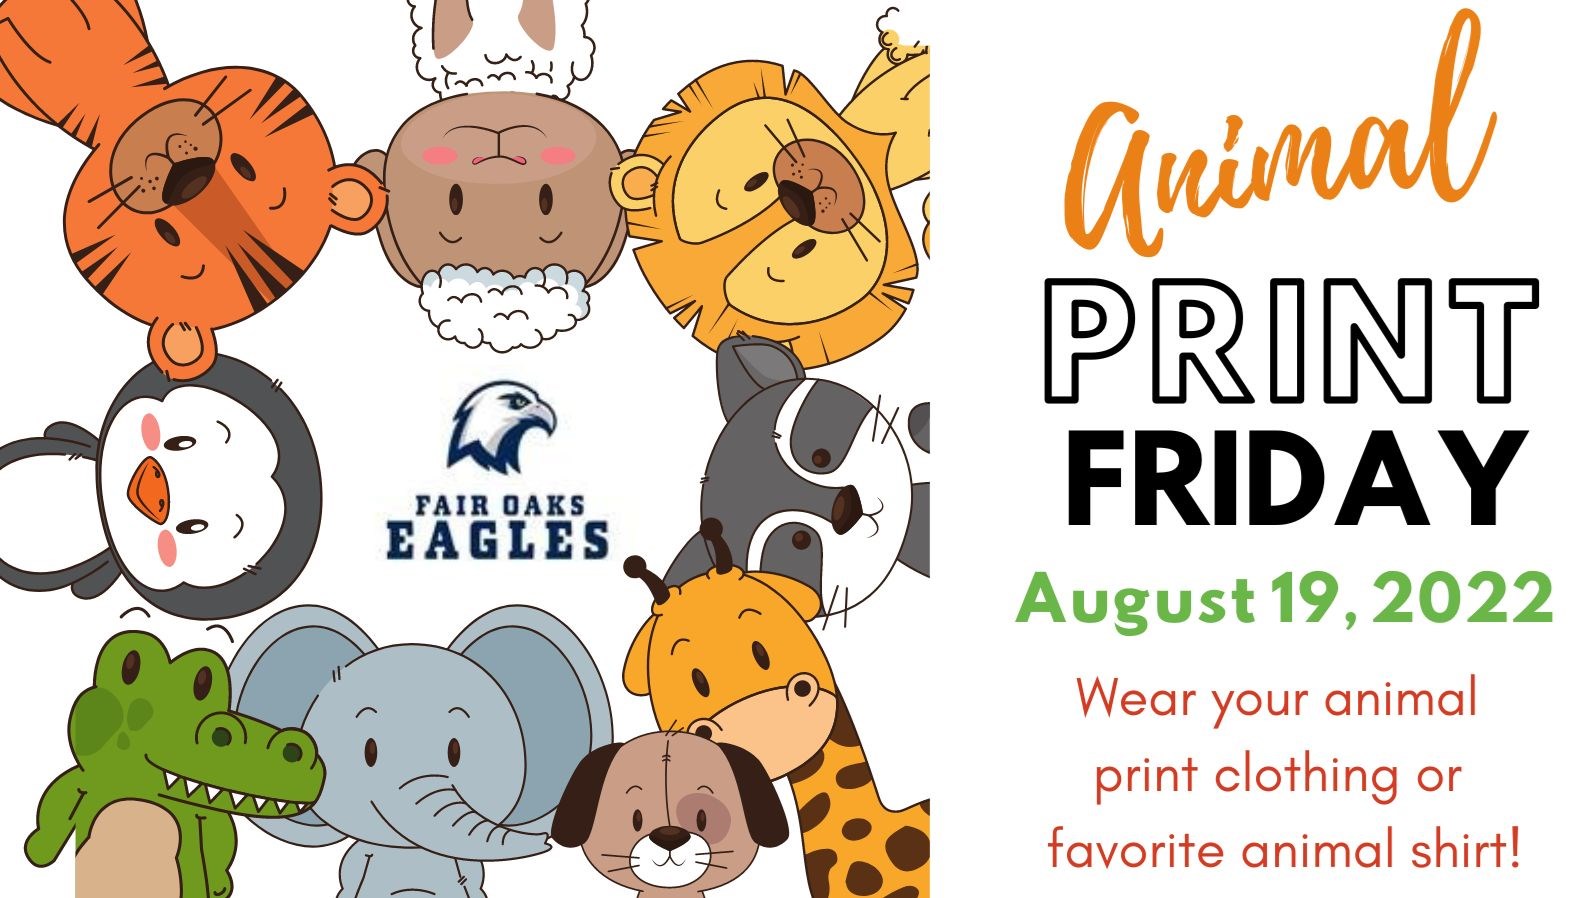 Wear Your Animal Print on August 19!